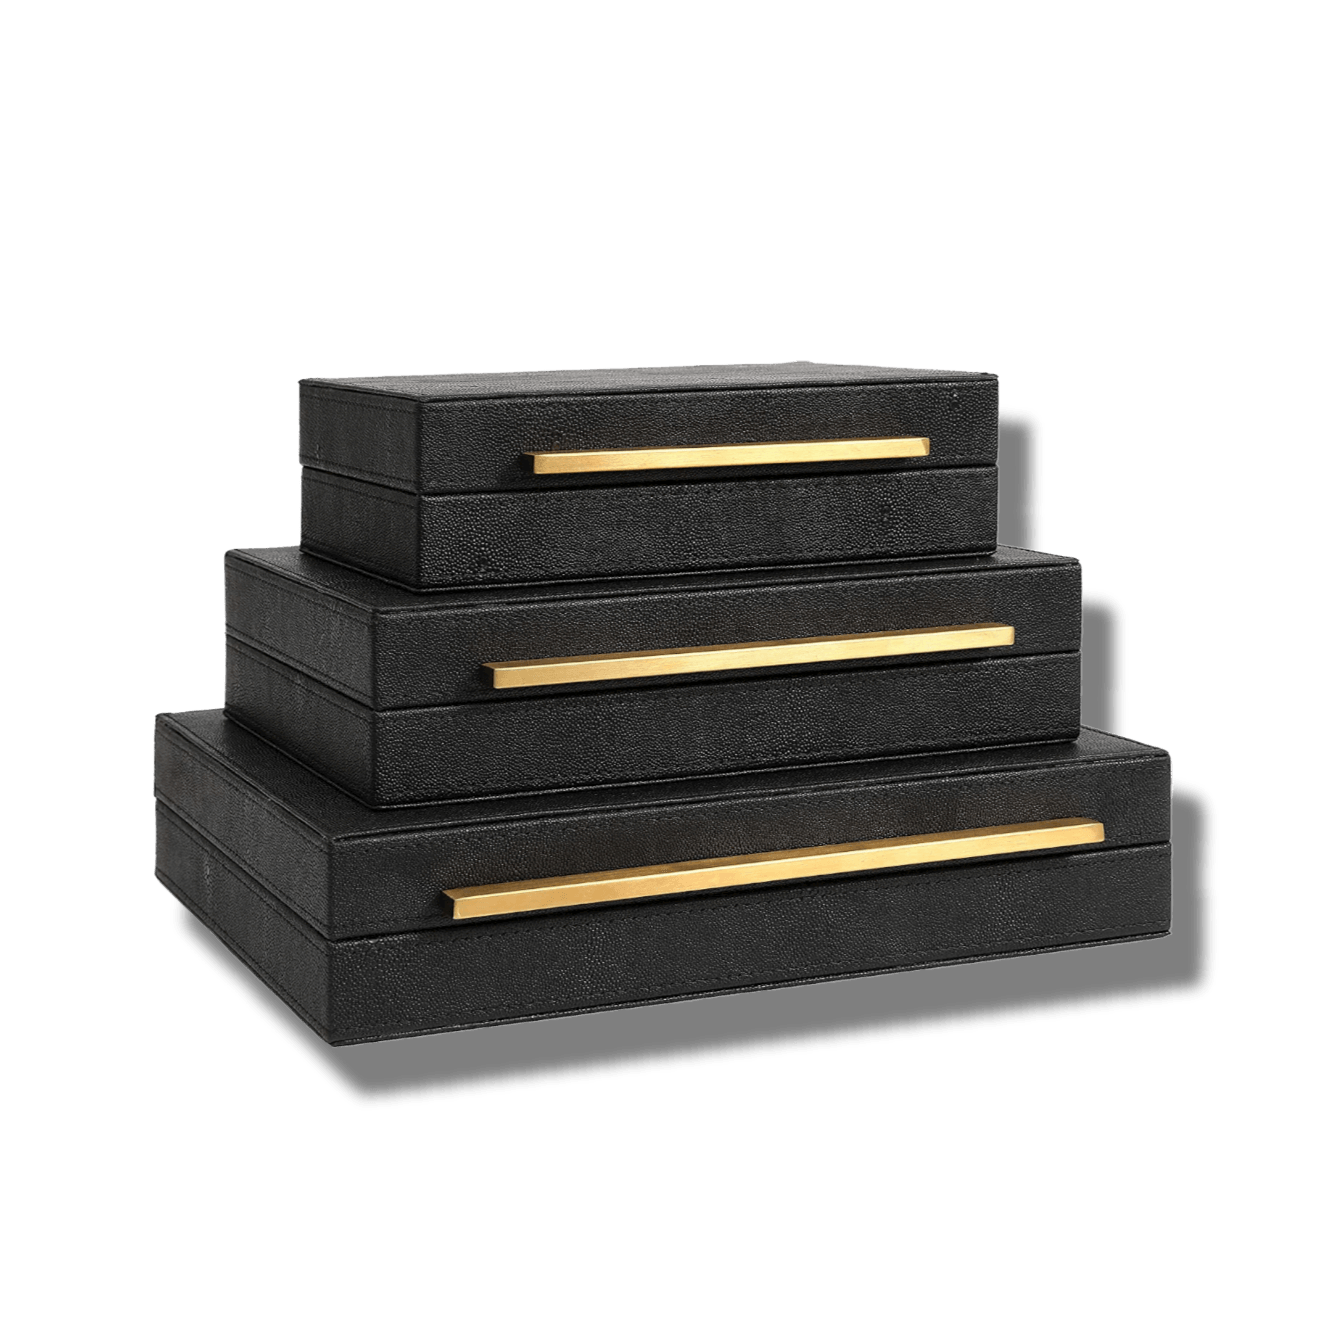 Ivory Faux Shagreen Leather Storage Boxes - Set of 3 - MAIA HOMES